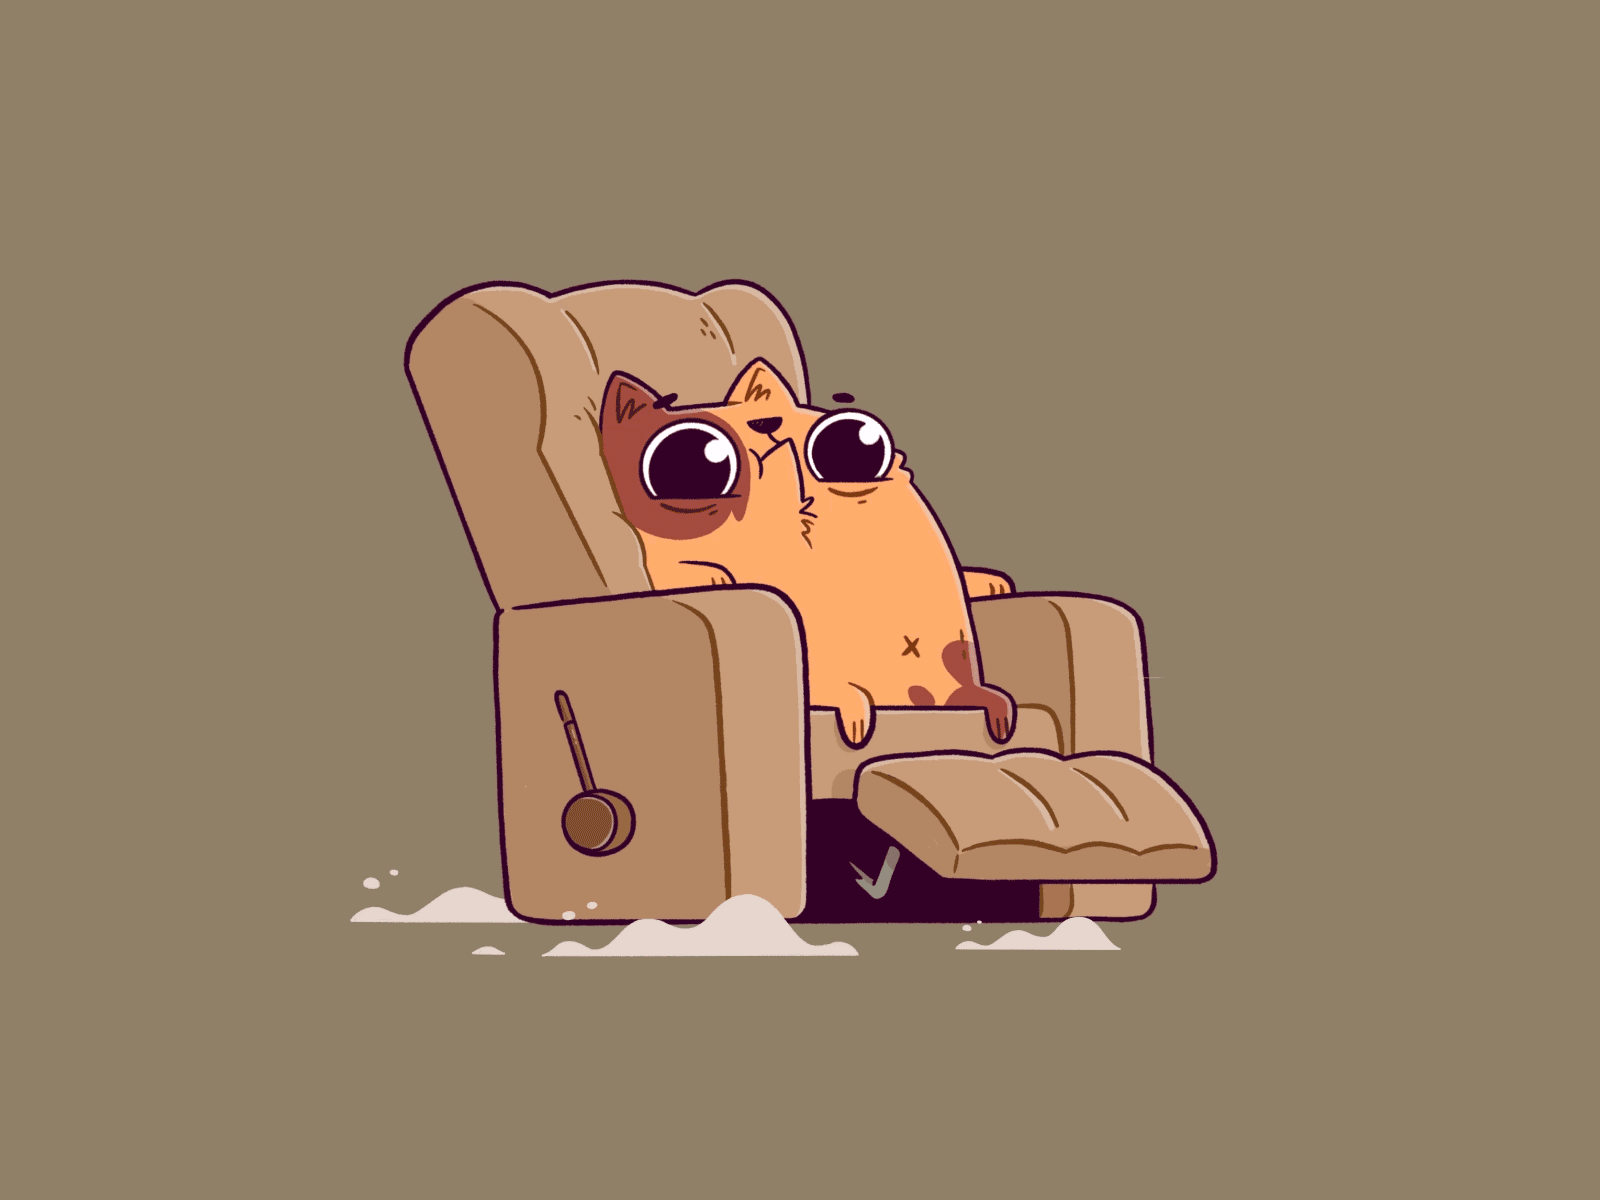 Cute Floof and the Recliner of Doom! 90s animal animation blake stevenson cartoon cat chair character design cute eyes fast hand drawn hipster illustration jetpacks and rollerskates retro silly skateboard smoke speed